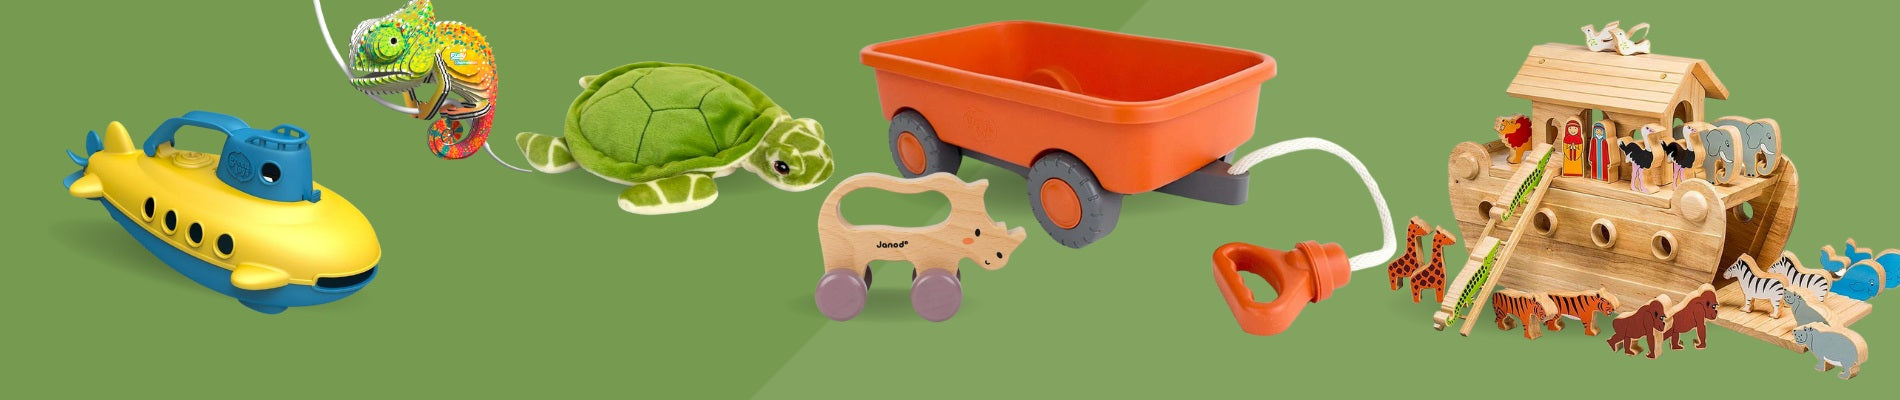 A collection of eco-friendly toys including a recycled plastic submarine, card chameleon model, a cuddly turtle, orange cart and wooden Noah's Ark.